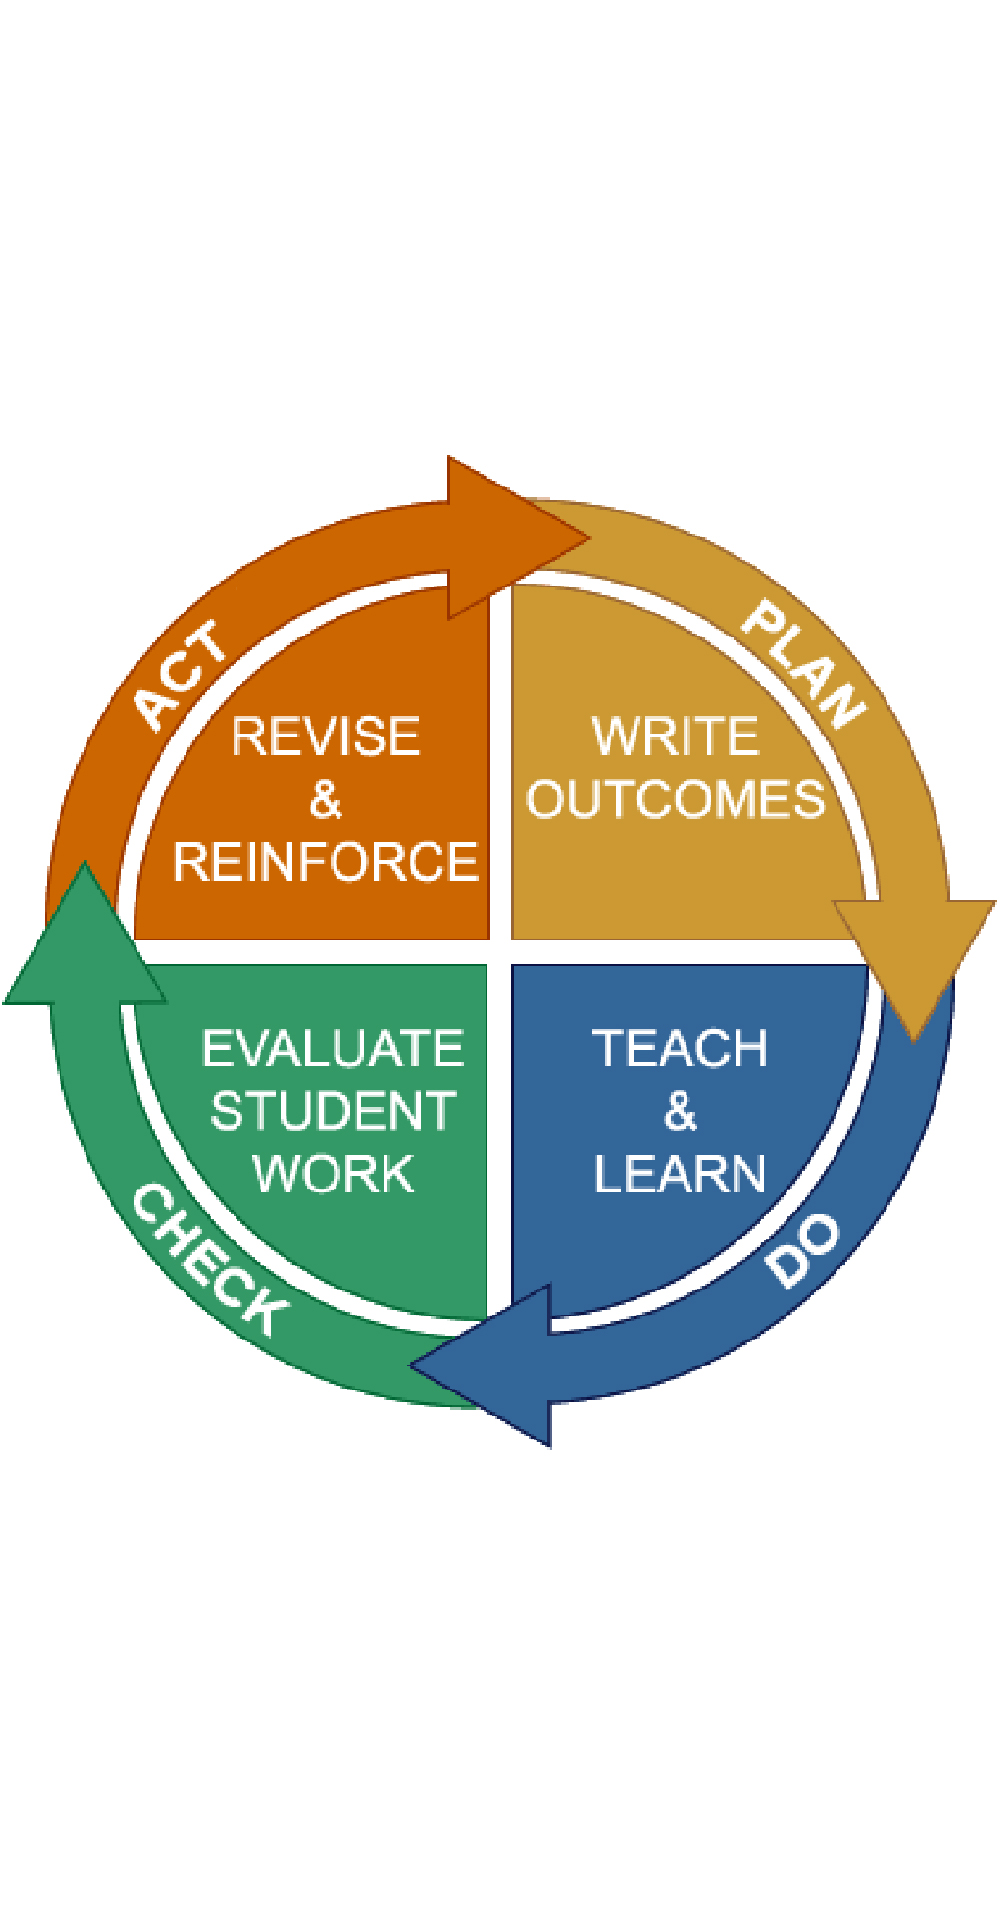 A circle graphic in 4 quadrants. 1. Plan - write outcomes, 2. Do - Teach & Learn, 3. Check - Evaluate Student Work, 4. Act - Revise & Reinforce.